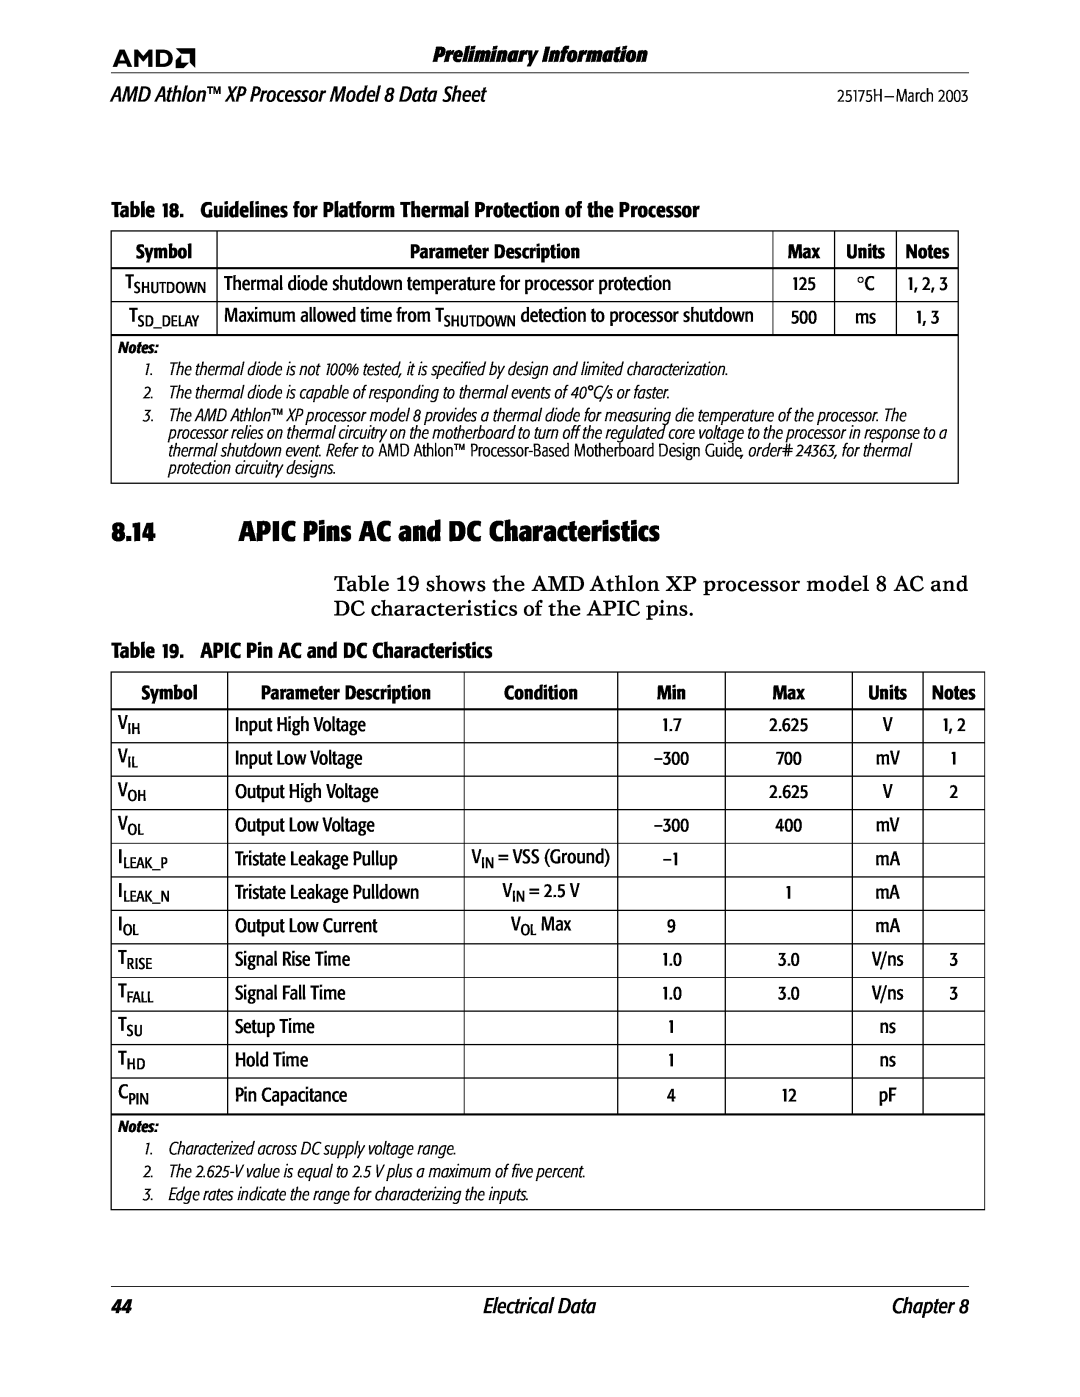 AMD 8 APIC Pins AC and DC Characteristics, Guidelines for Platform Thermal Protection of the Processor, Electrical Data 